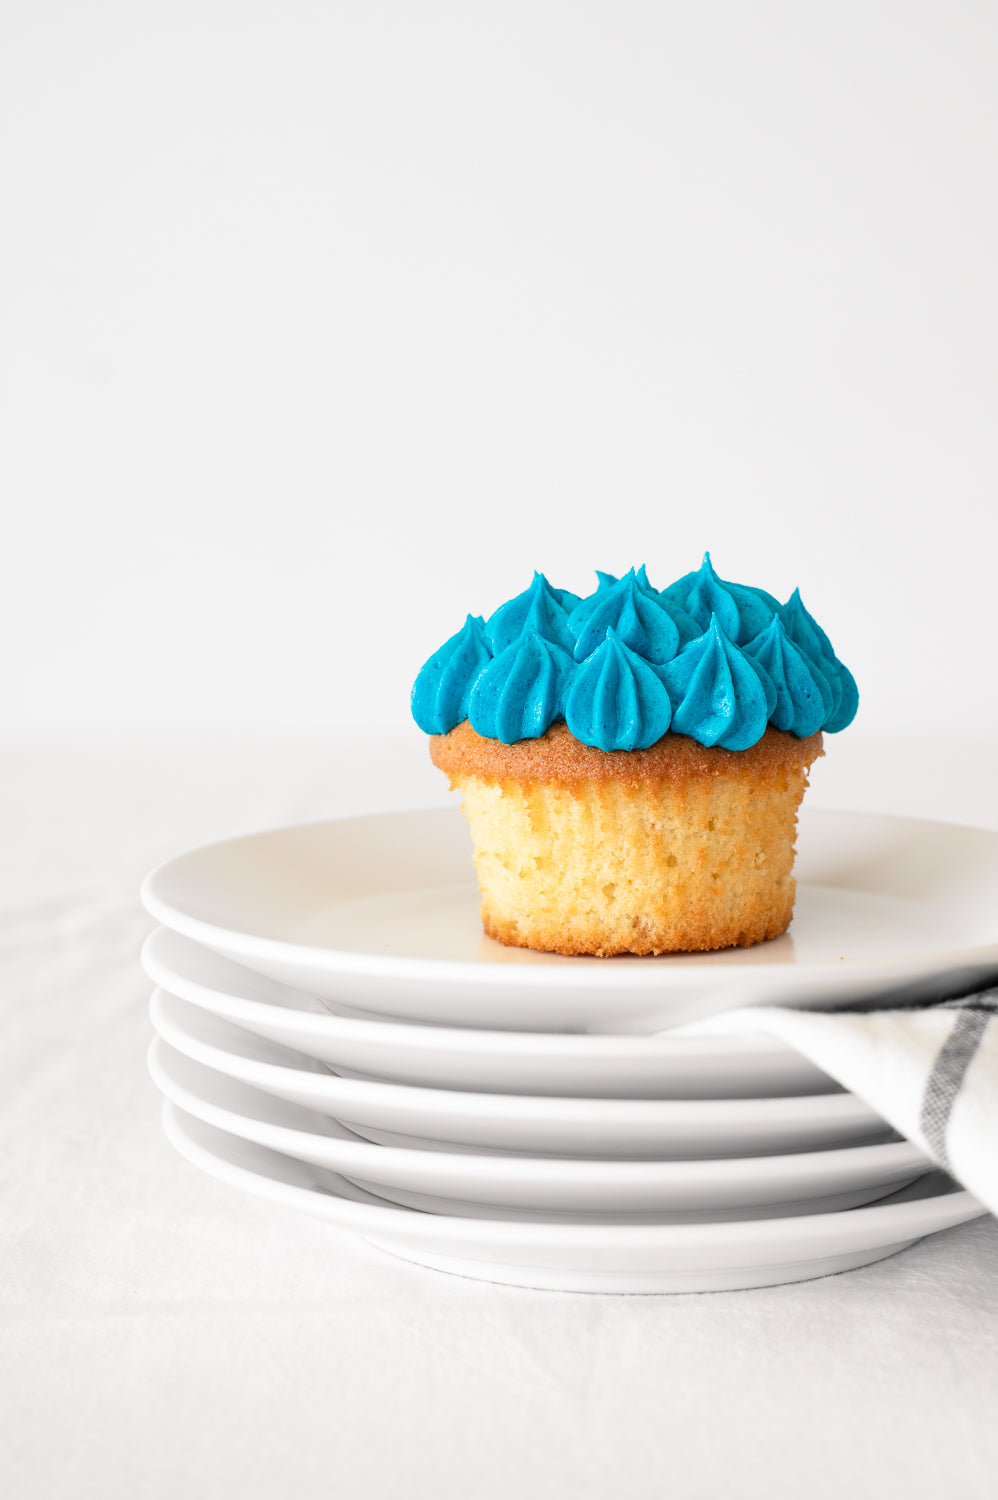 A stack of plates holding a vanilla cupcake with blue piped icing